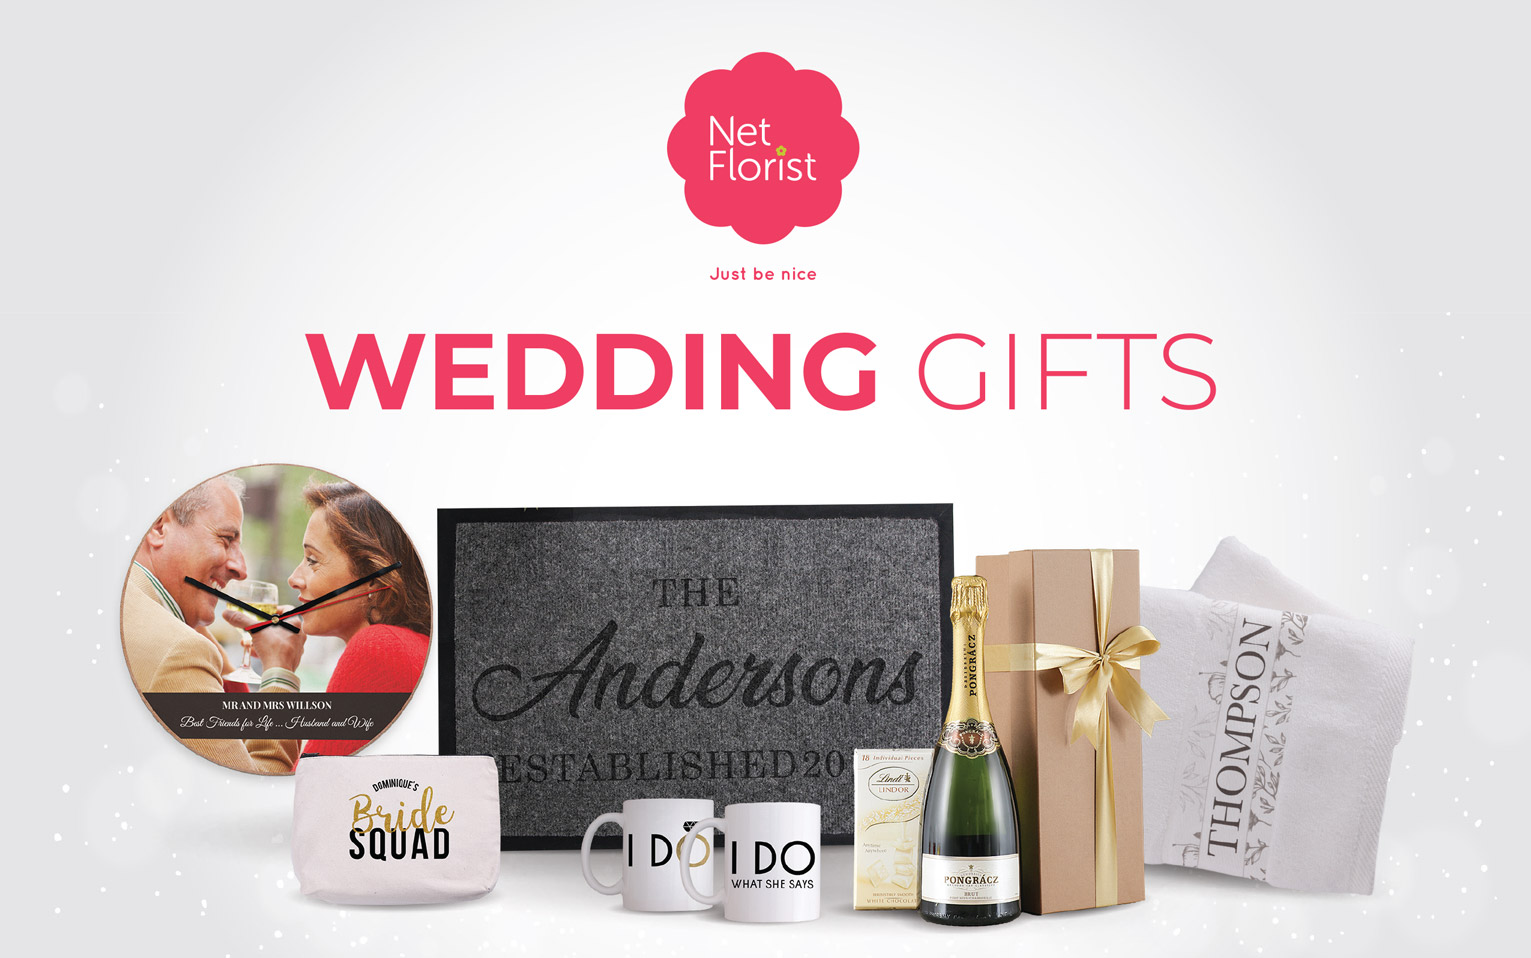 Wedding gifts from Netflorist